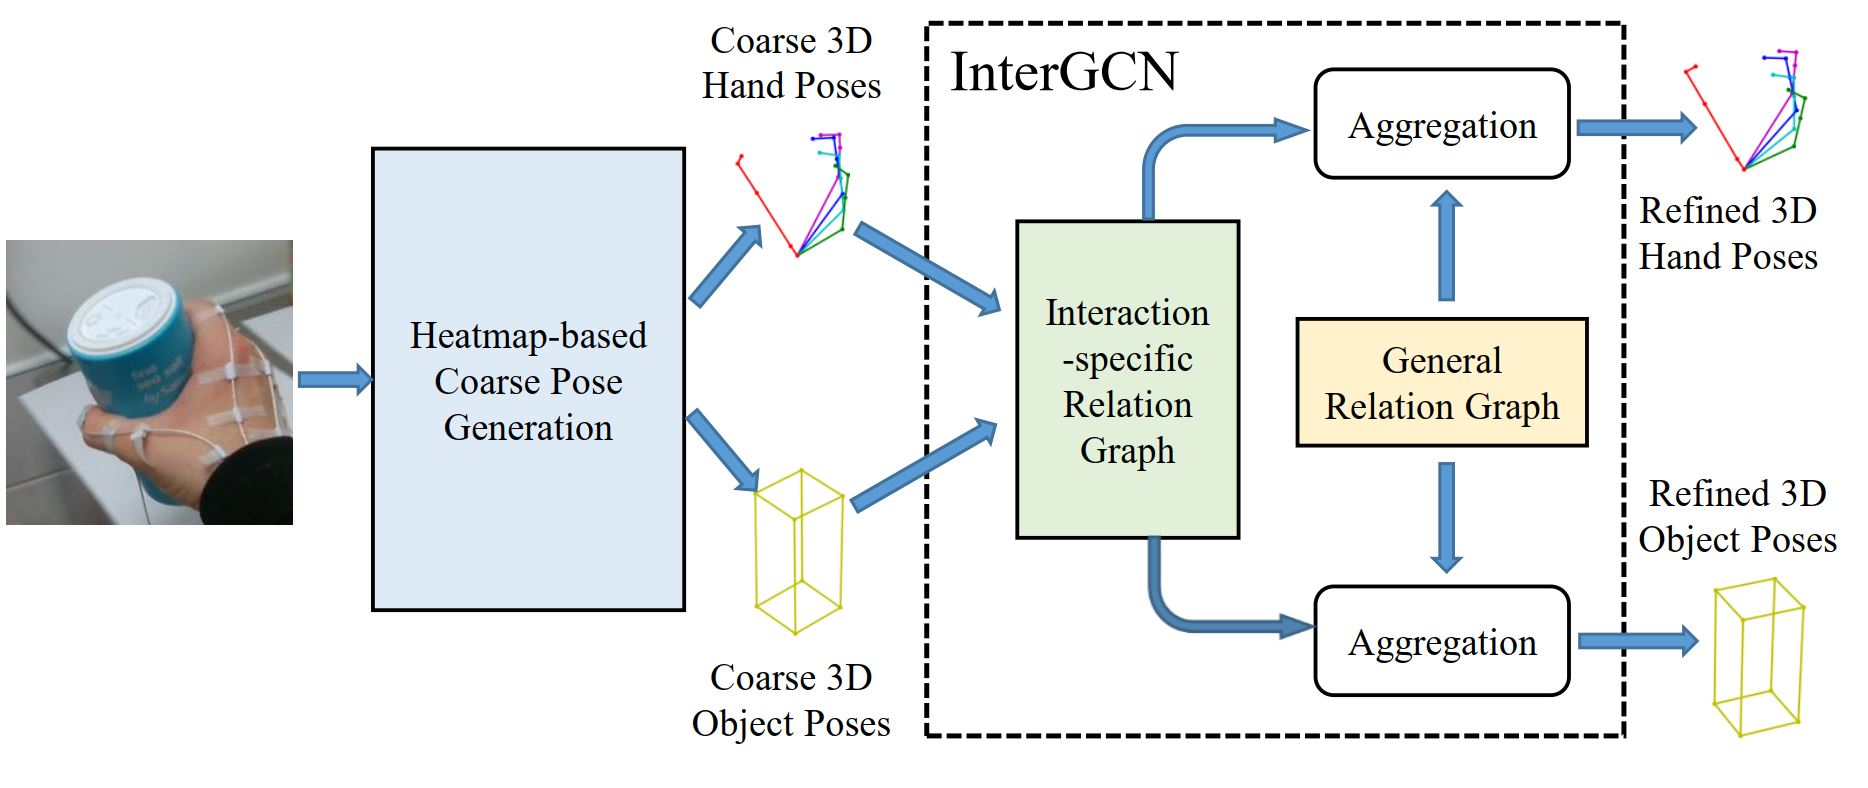 Neural Object Learning for 6D Pose Estimation Using a Few Cluttered Images